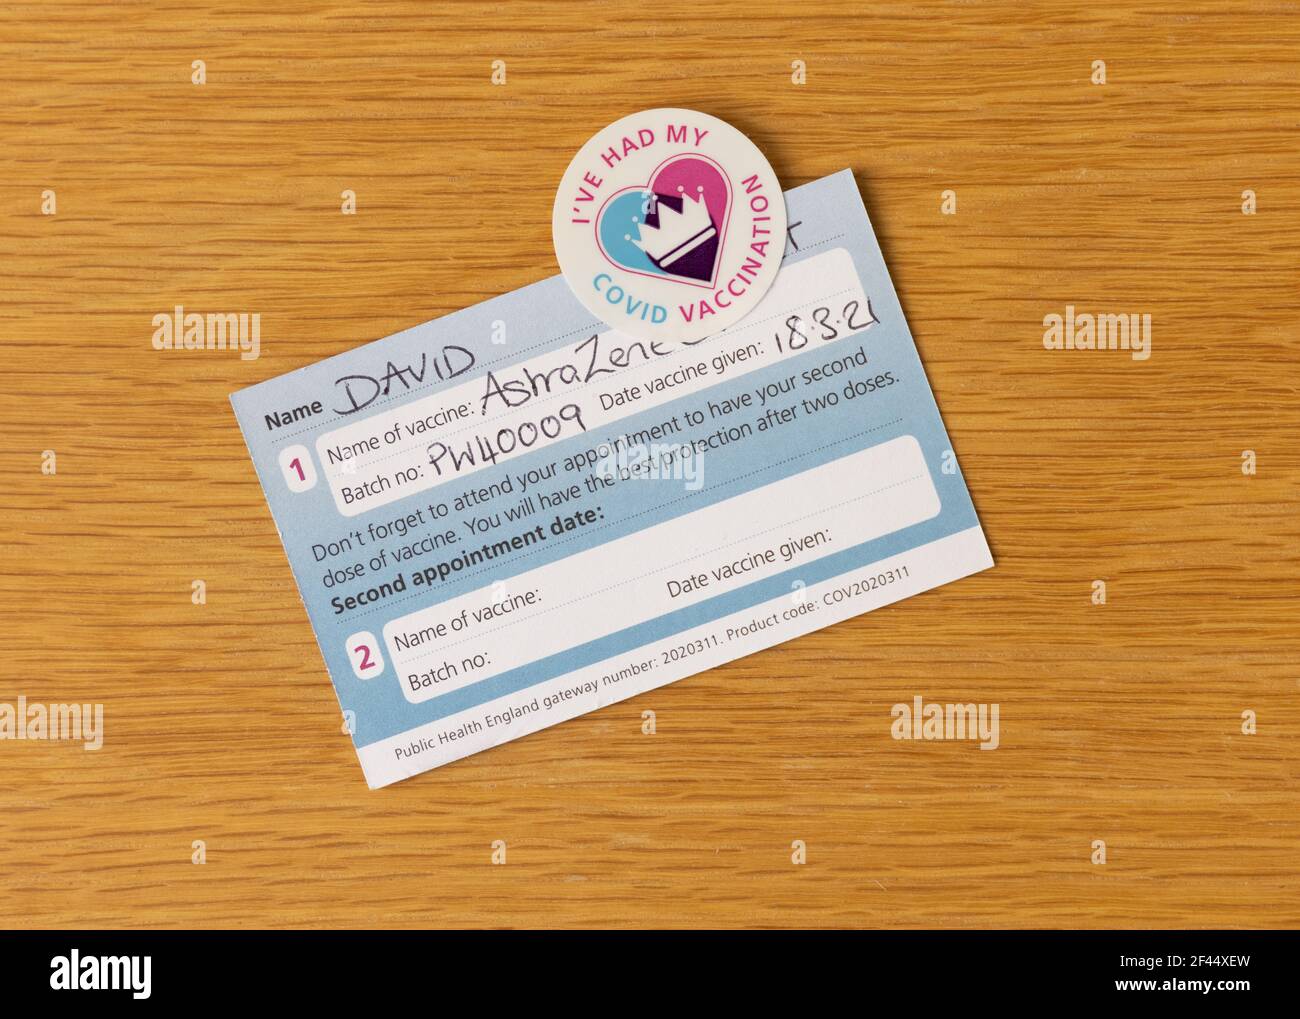 COVID 19 vaccination card and sticker, issued to people who have had their first injection. Bishop's Stortford, Hertfordshire. UK Stock Photo